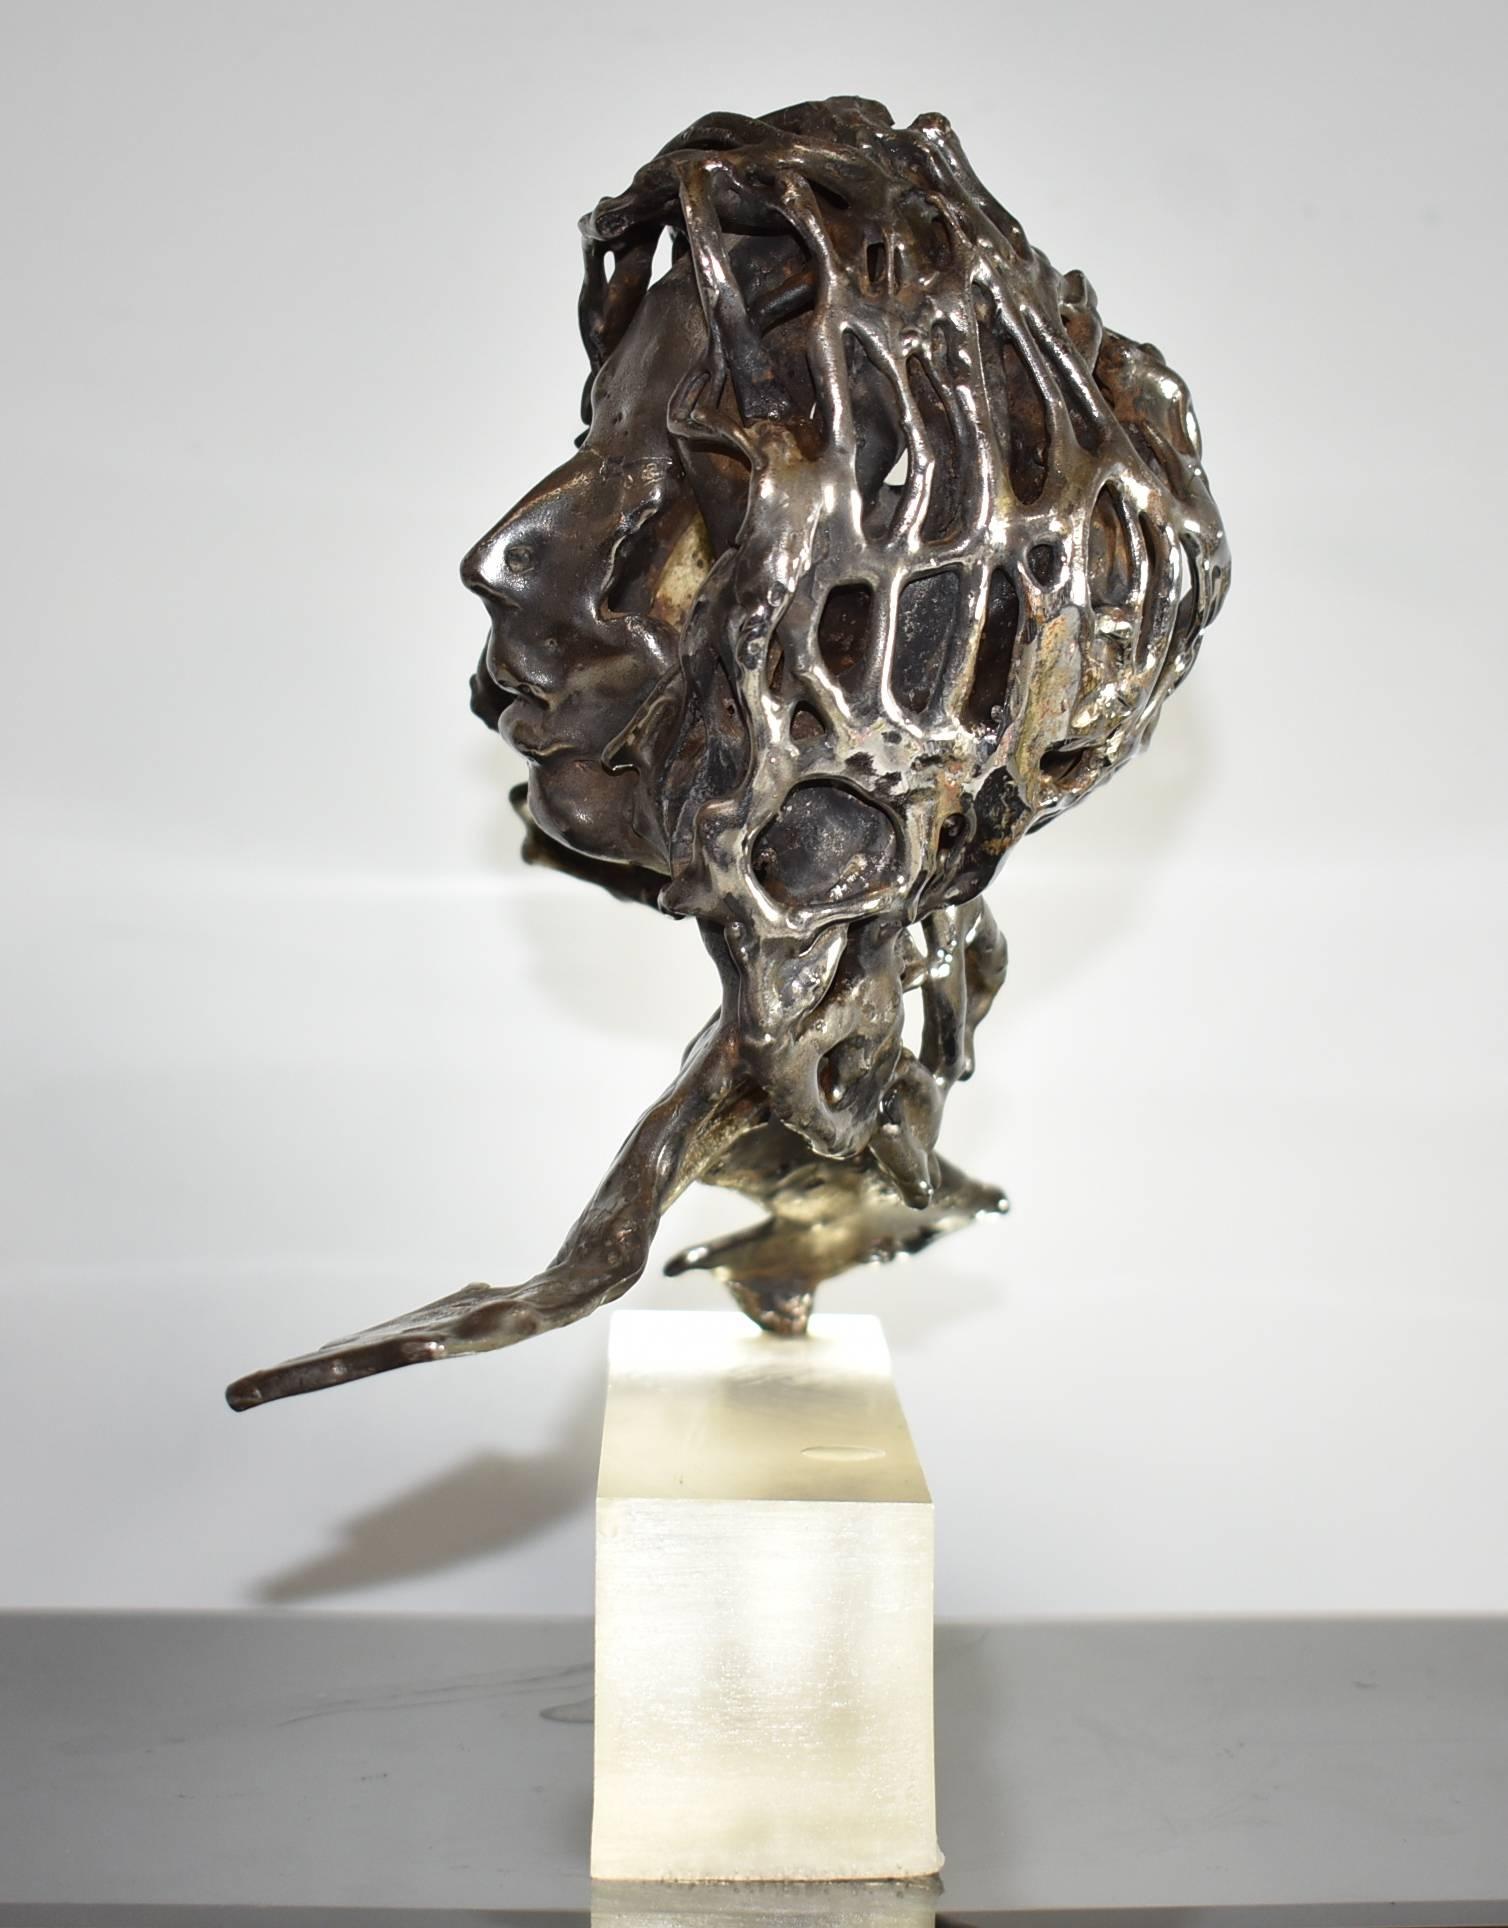 An unusual Brutalist abstract sculpture in what is believed to be nickel-plated bronze of a female bust. Sculpture is 11" tall and 11" wide and is attached to a Lucite base which is 8.5" wide by 2.5" tall. The figure is signed D.